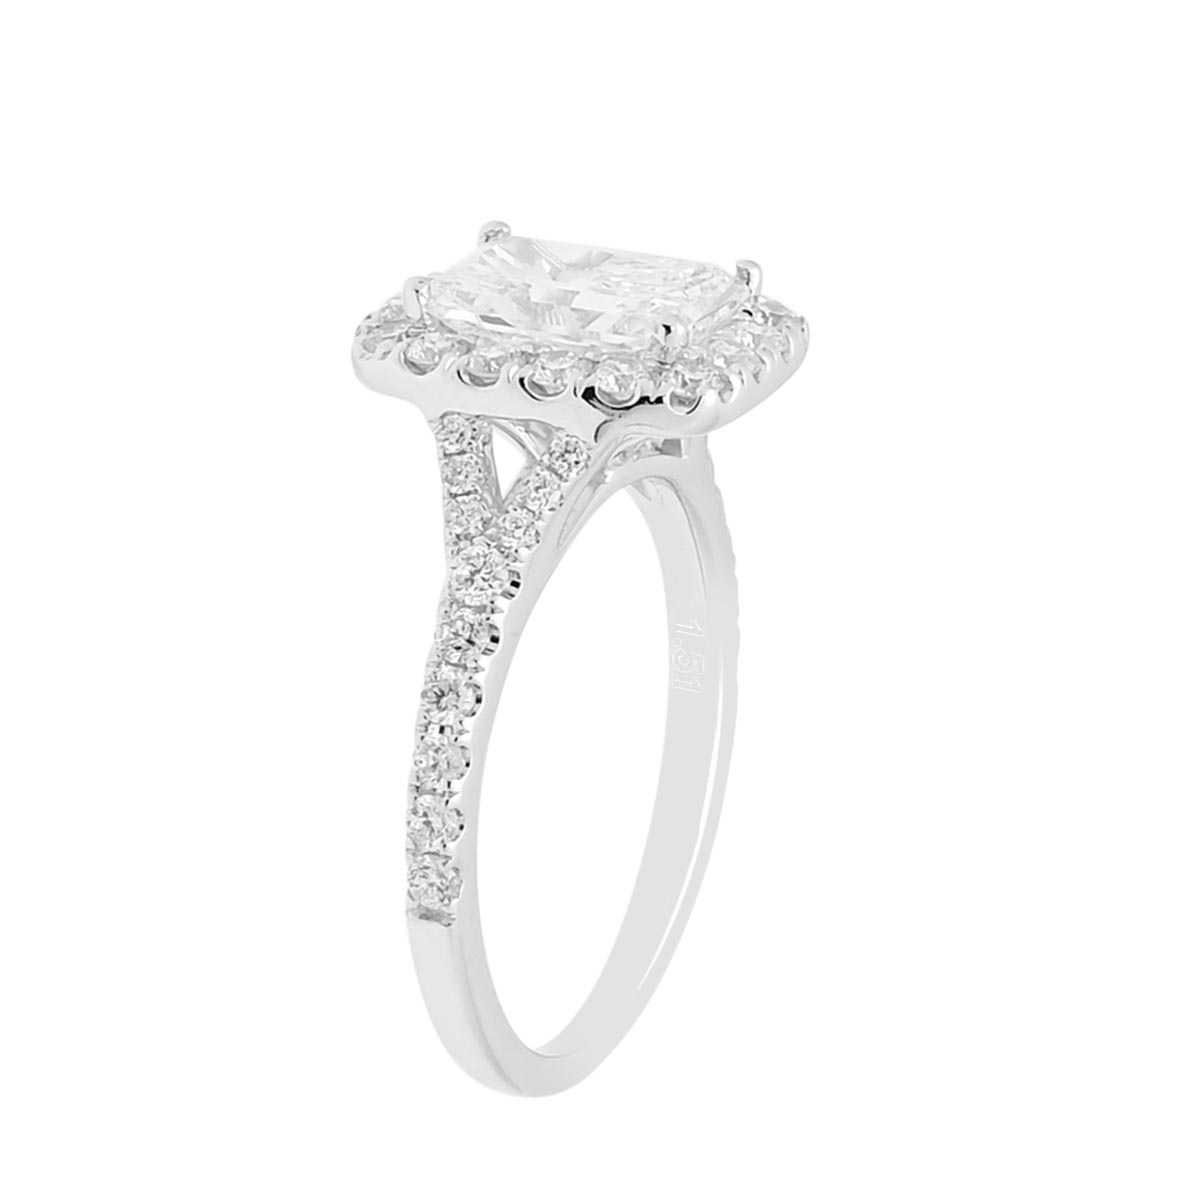 Radiant Cut Diamond Halo Engagement Ring in 18kt White Gold (2ct tw)